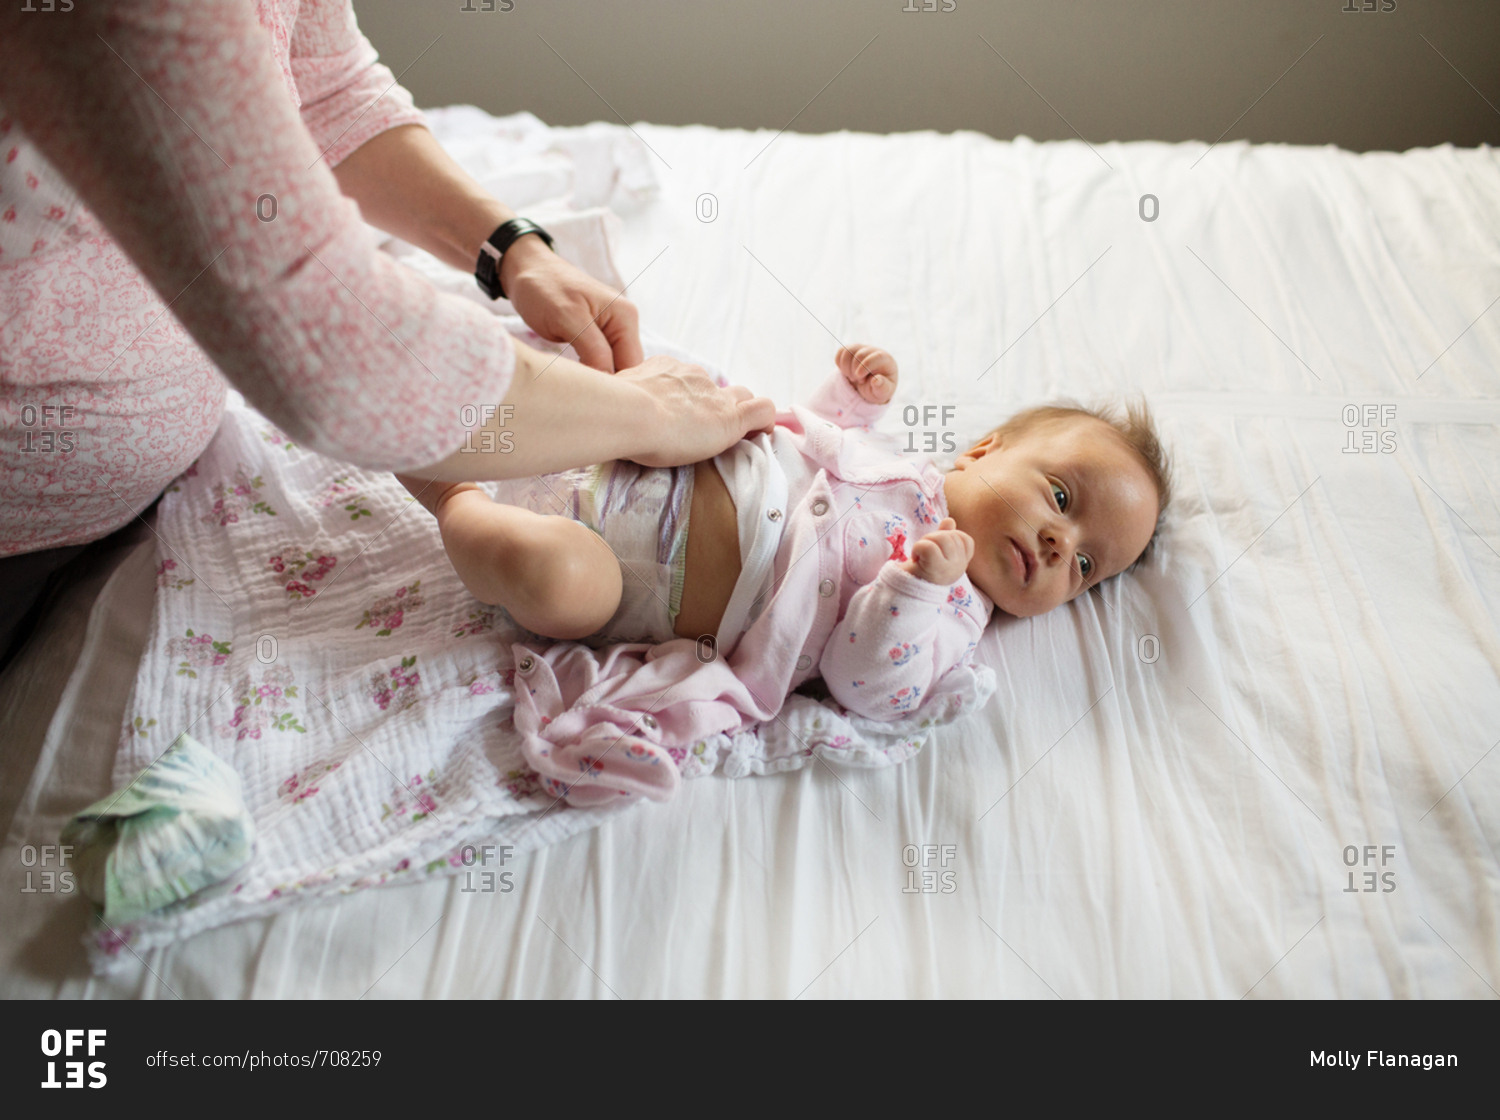 Looking down on baby having diaper changed by mother